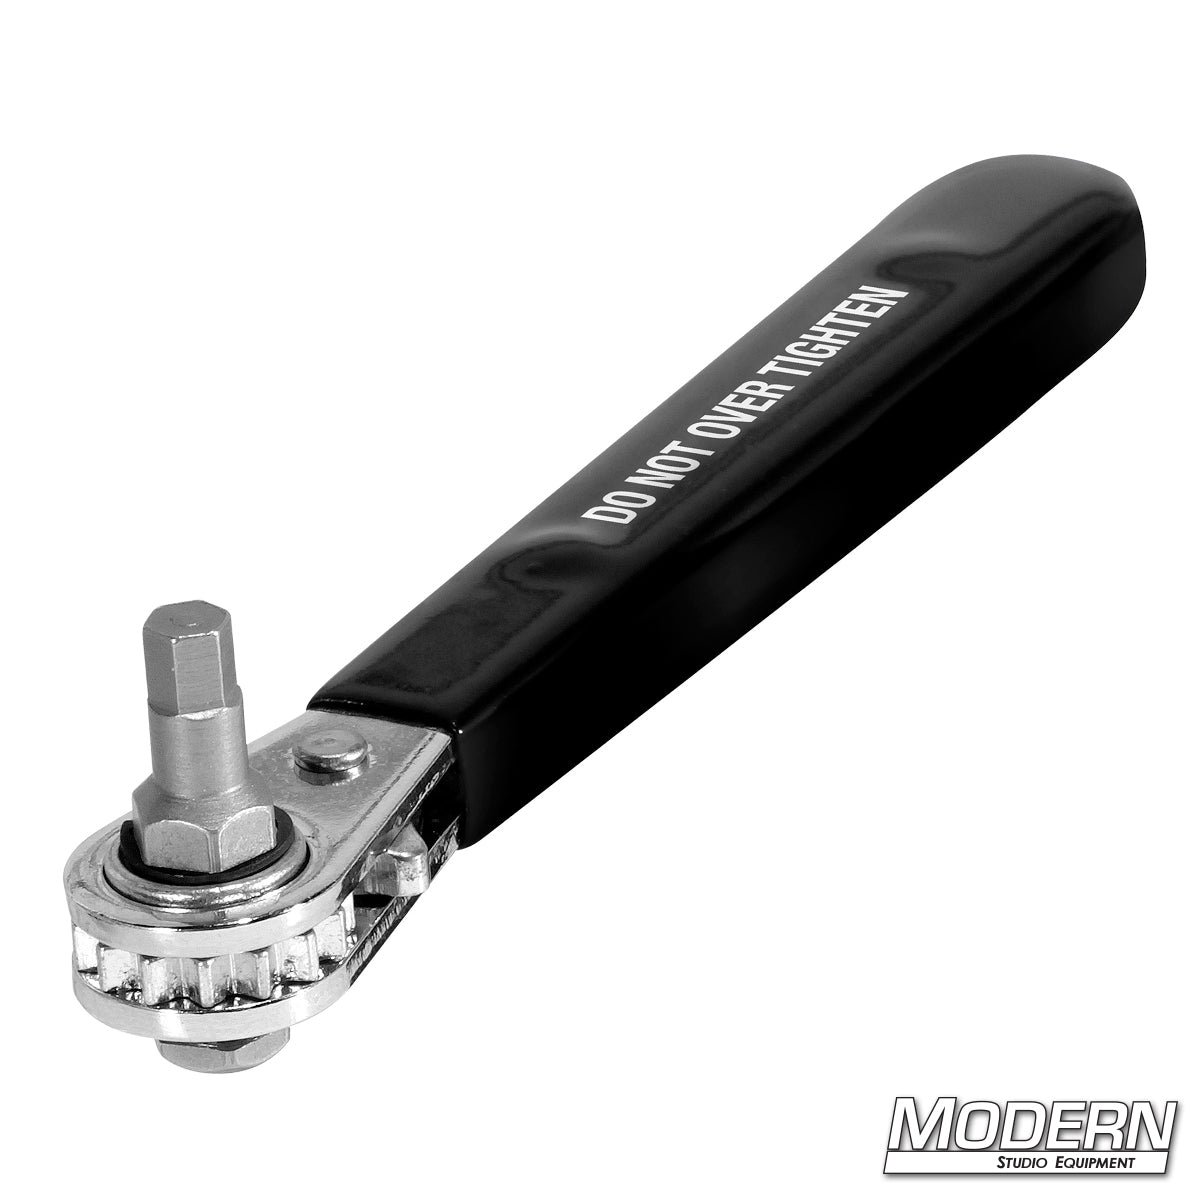 Low Profile 3/16" Speed Wrench